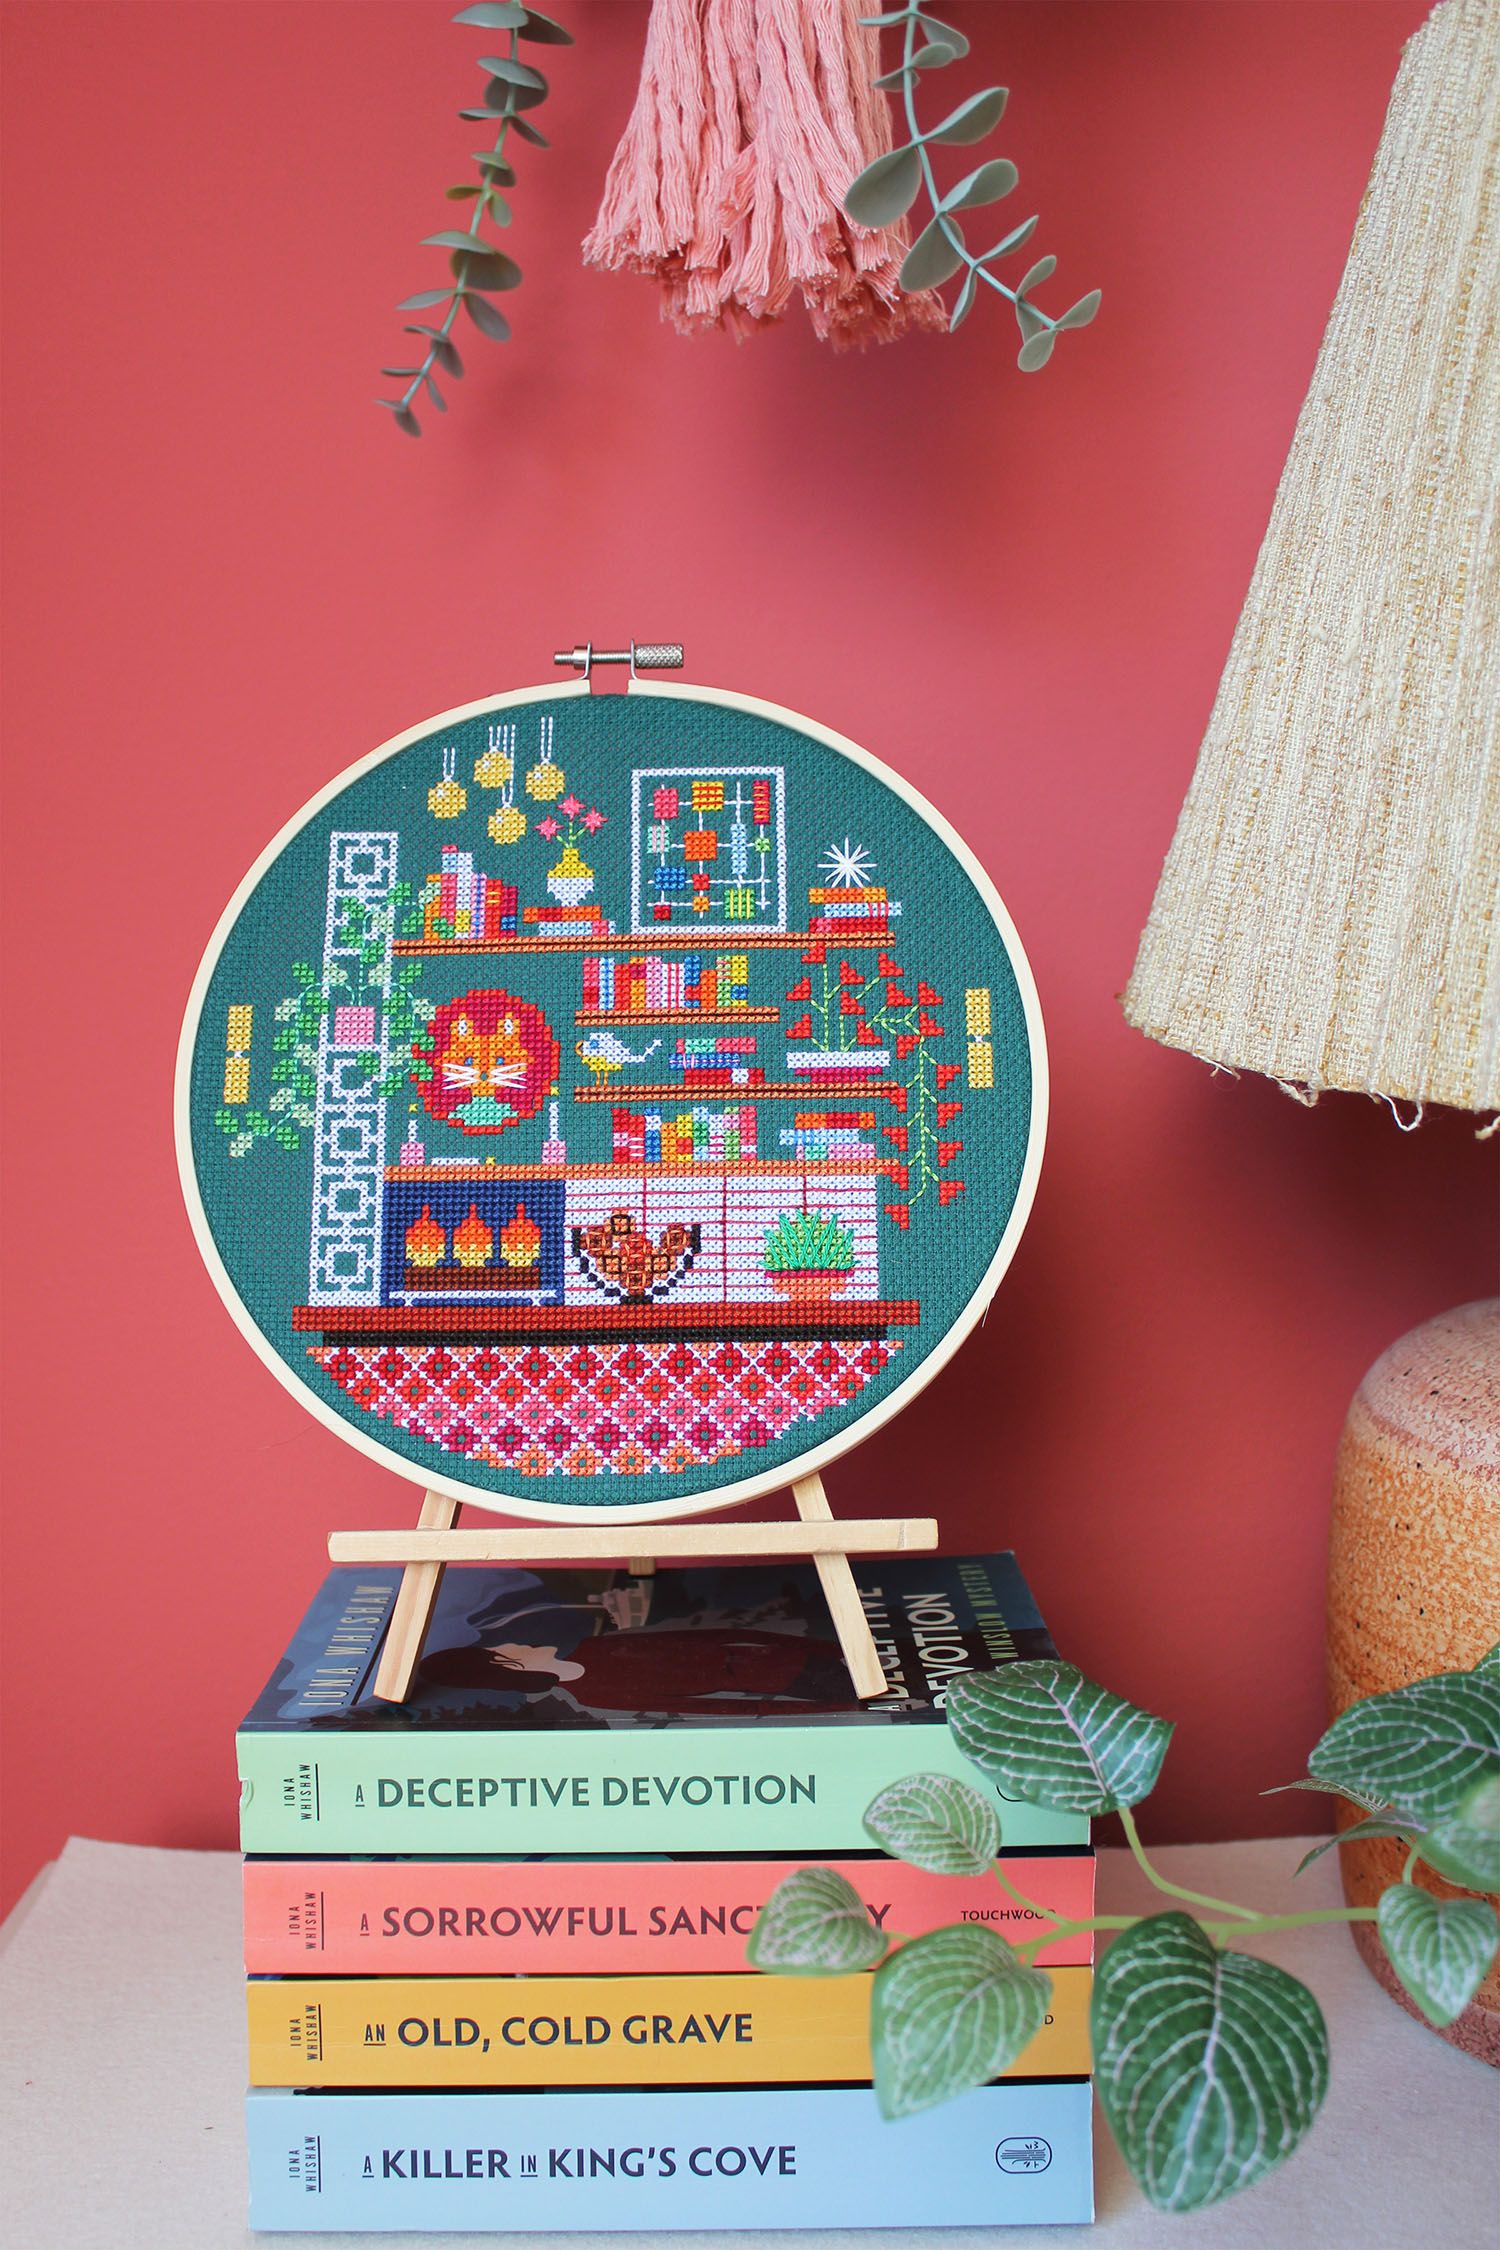 A framed cross-stitch on a stand on top of a pile of books, on a dresser with a plant and lamp